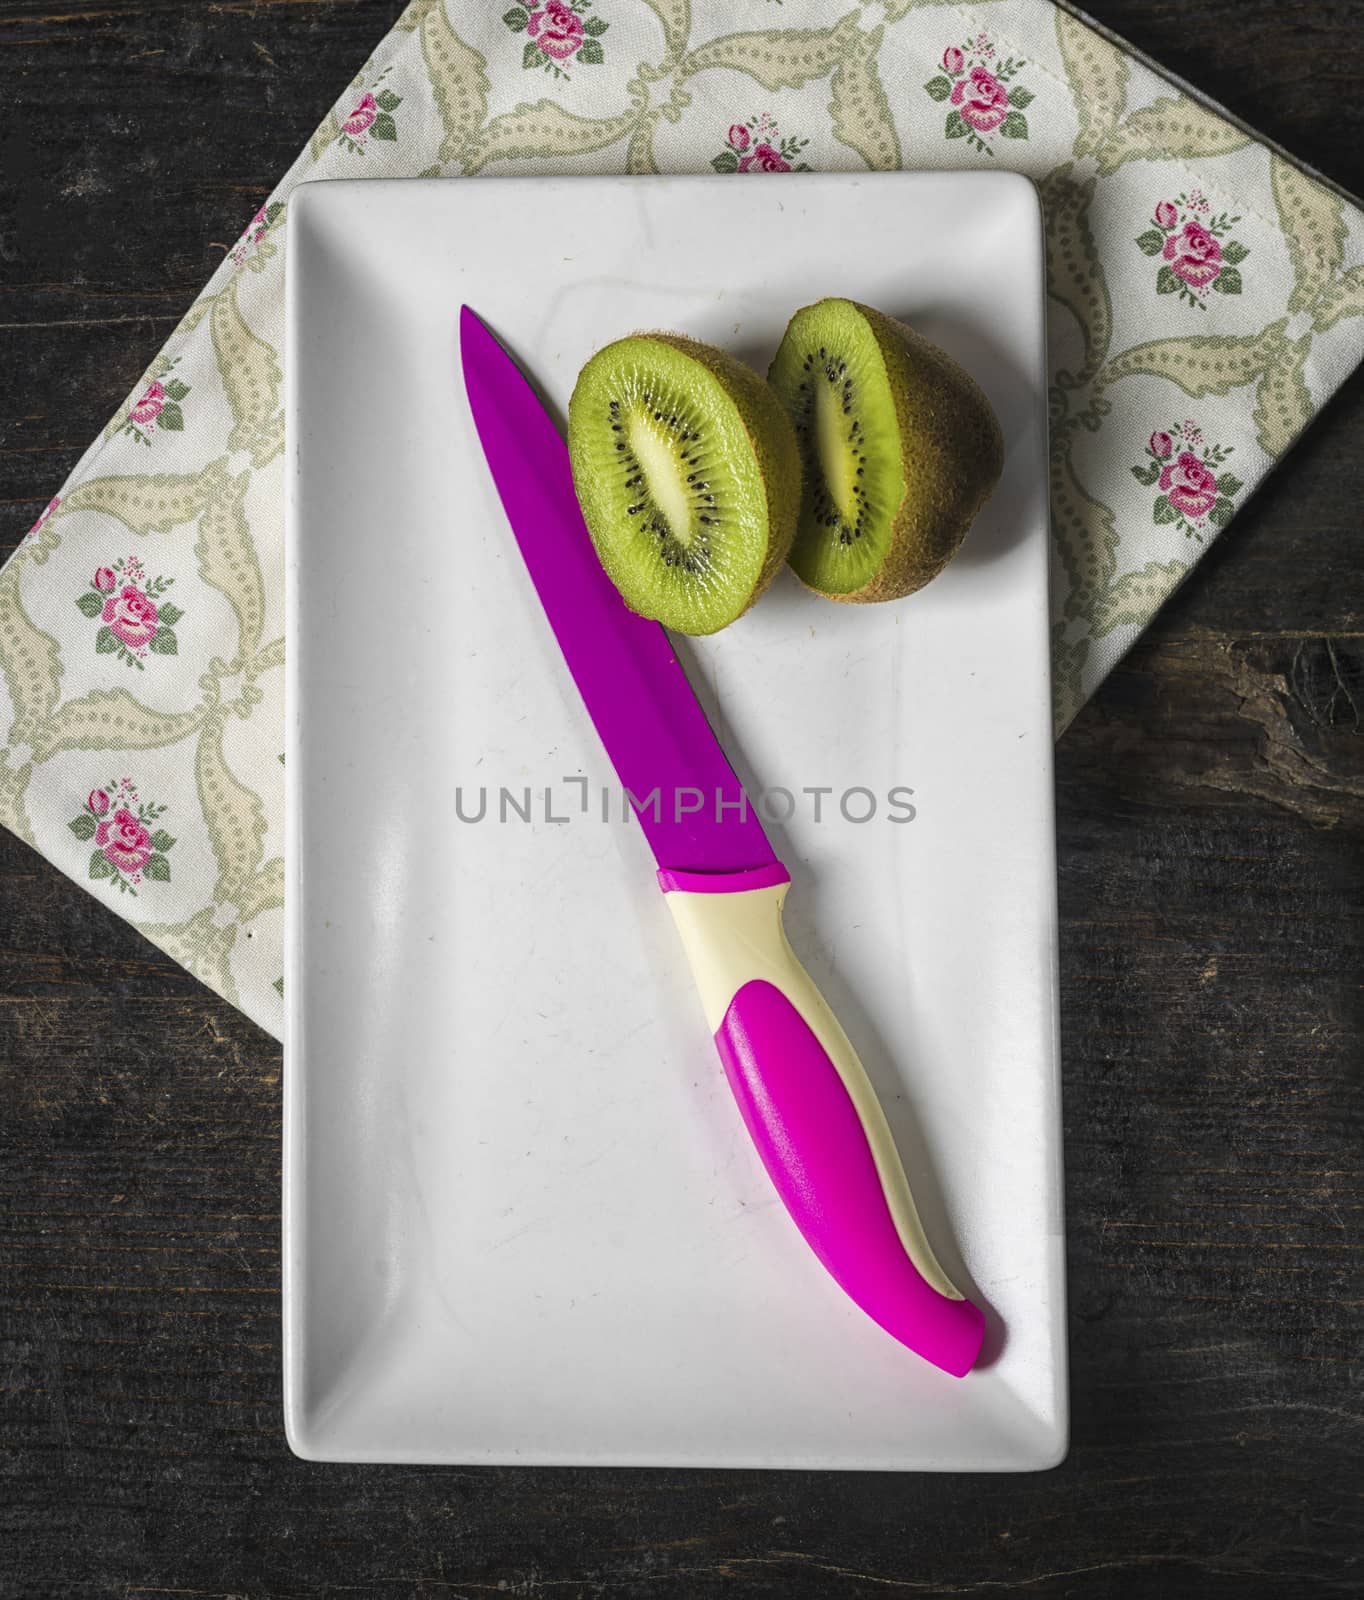 Kiwi fruit and a colored knife over a dark wooden table,